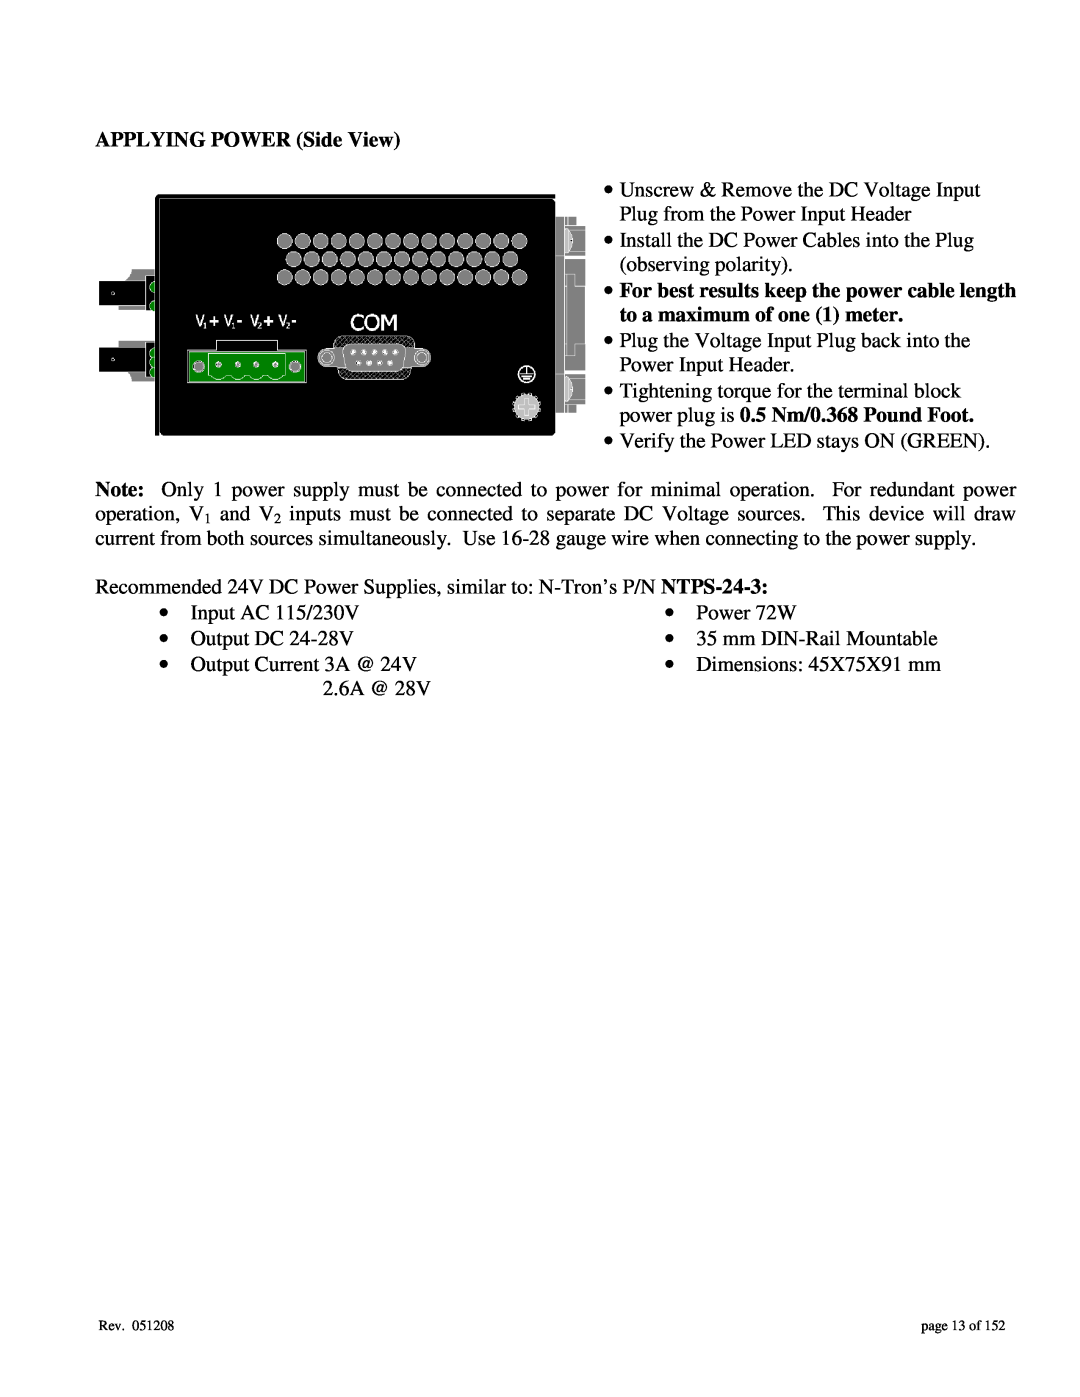 Gigabyte 7014 user manual APPLYING POWER Side View, page 13 of 